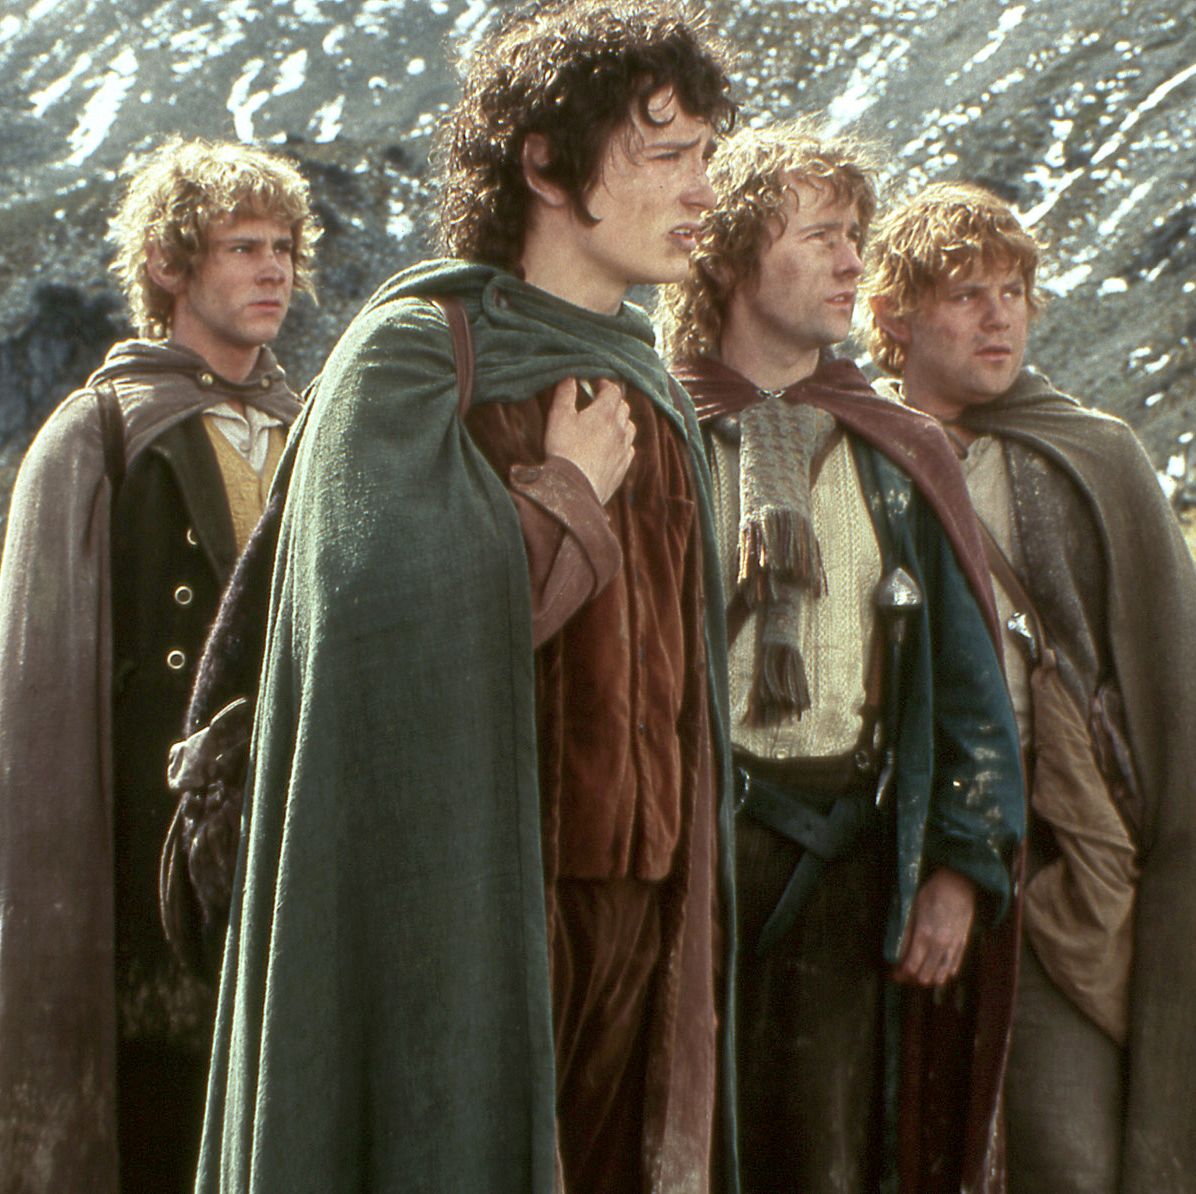 The Lord of the Rings TV series has finished filming, and it has a